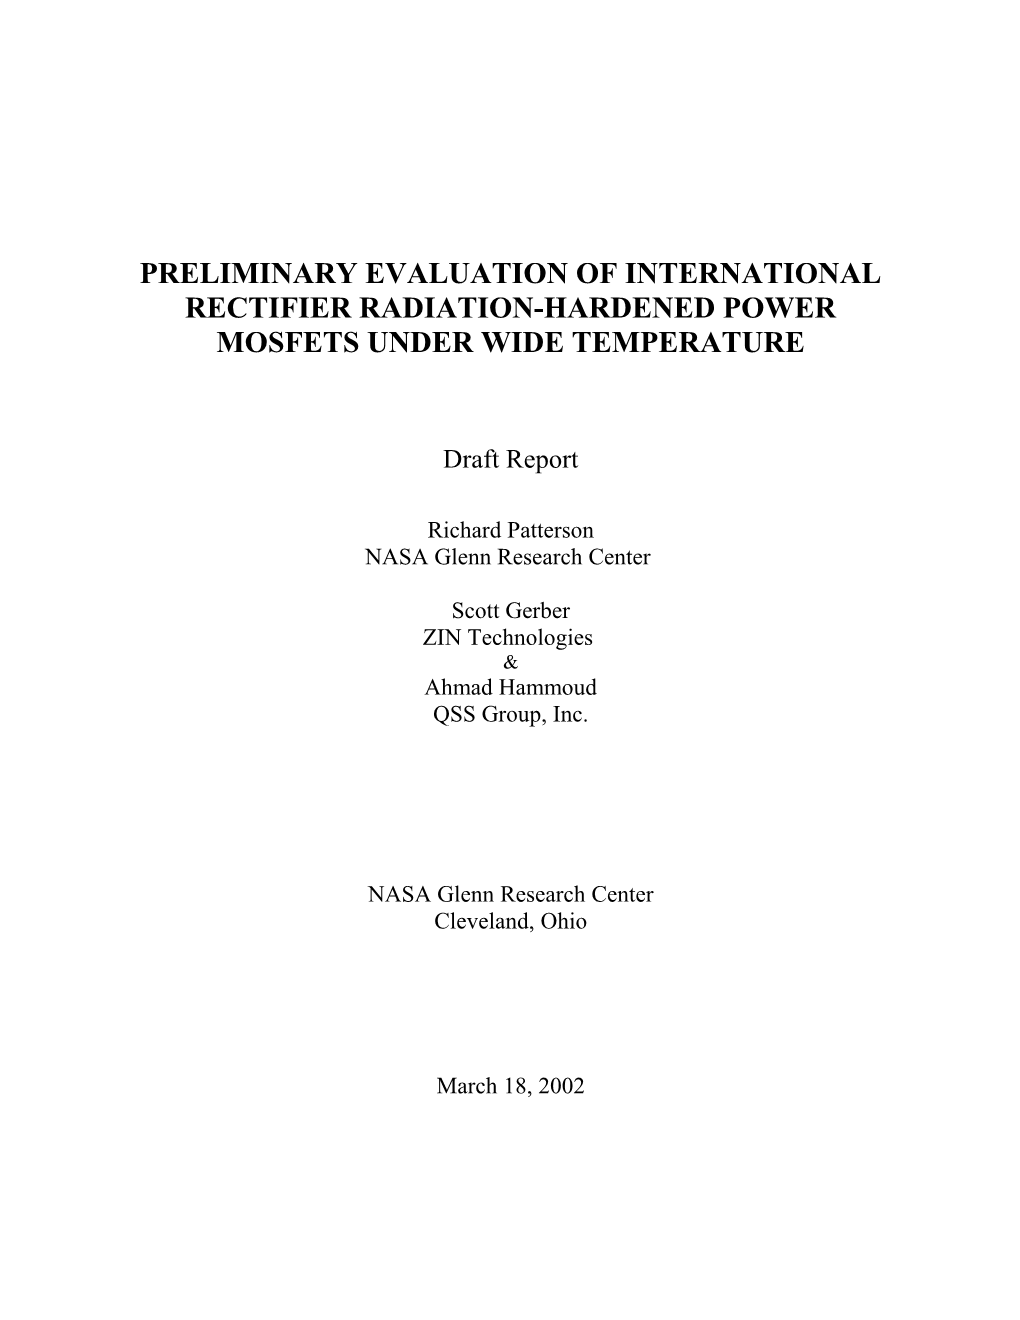 Preliminary Evaluation of International Rectifier Radiation-Hardened Power Mosfets Under